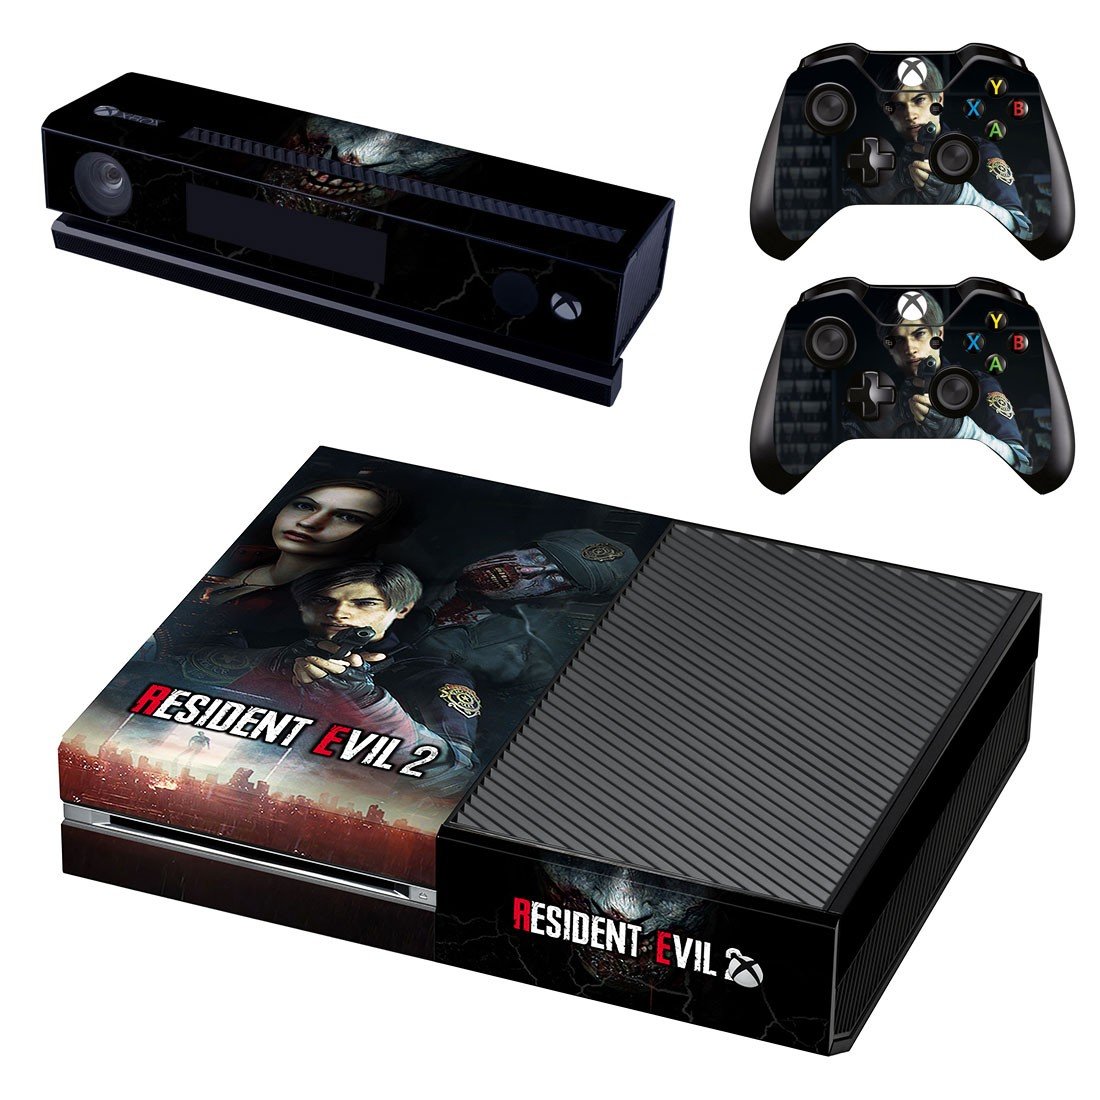 Xbox One And Controllers Skin Sticker - Resident Evil 2